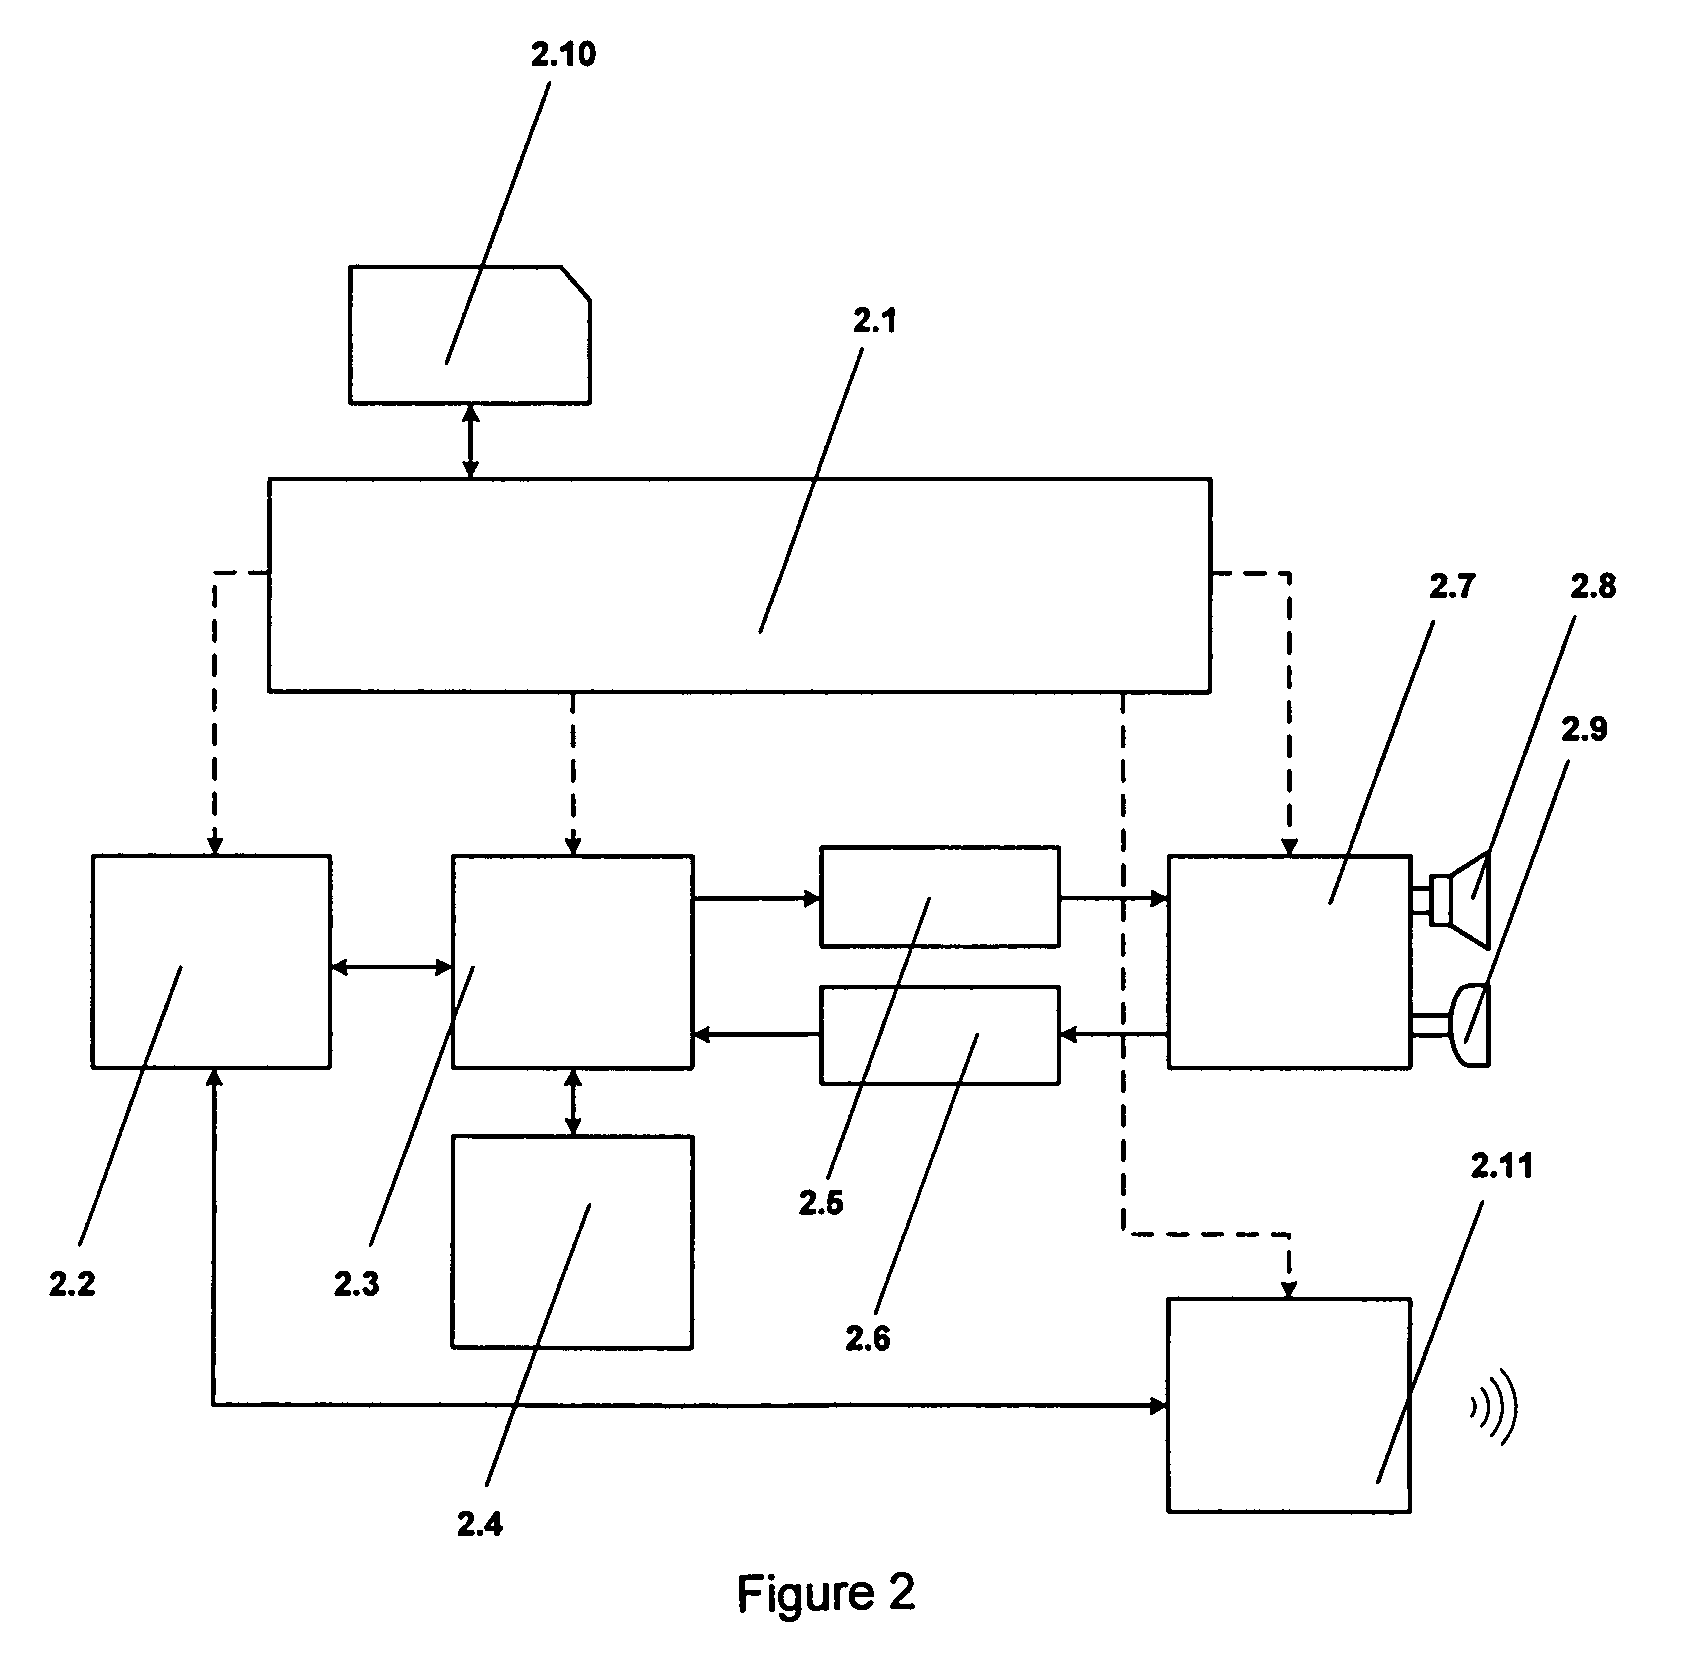 Wireless mobile transaction system and the procedure for carrying out transactions with a mobile phone